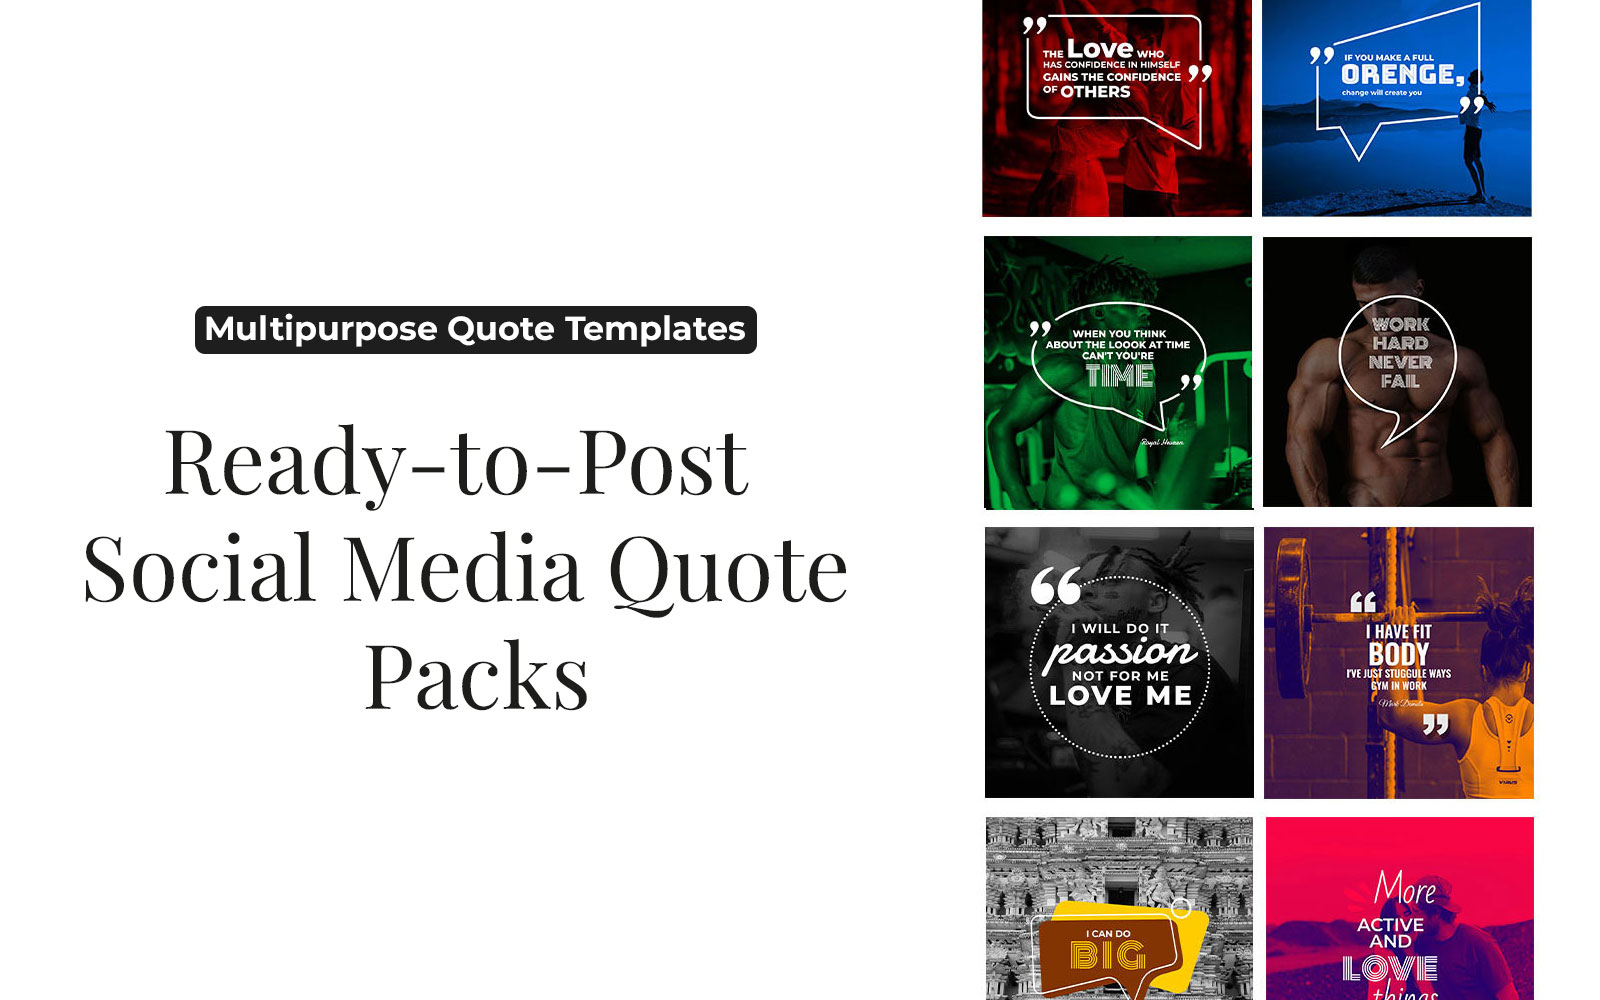 Ready-to-Post Social Media Quote Packs